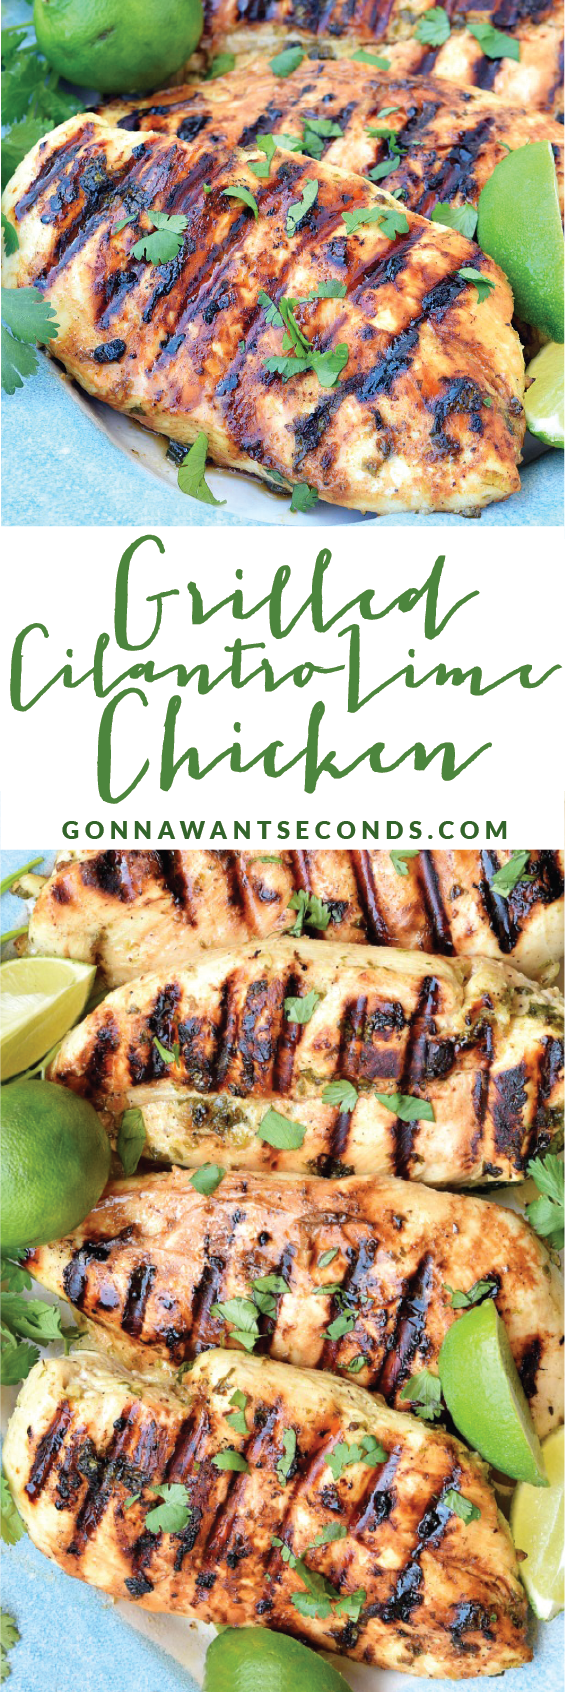 Grilled Cilantro Lime Chicken-This chicken is marinated in a zesty combo of fresh lime juice, garlic and cilantro. The flavors are refreshingly delicious and really permeate the chicken. It's also the perfect chicken to use in tacos or in a salad!